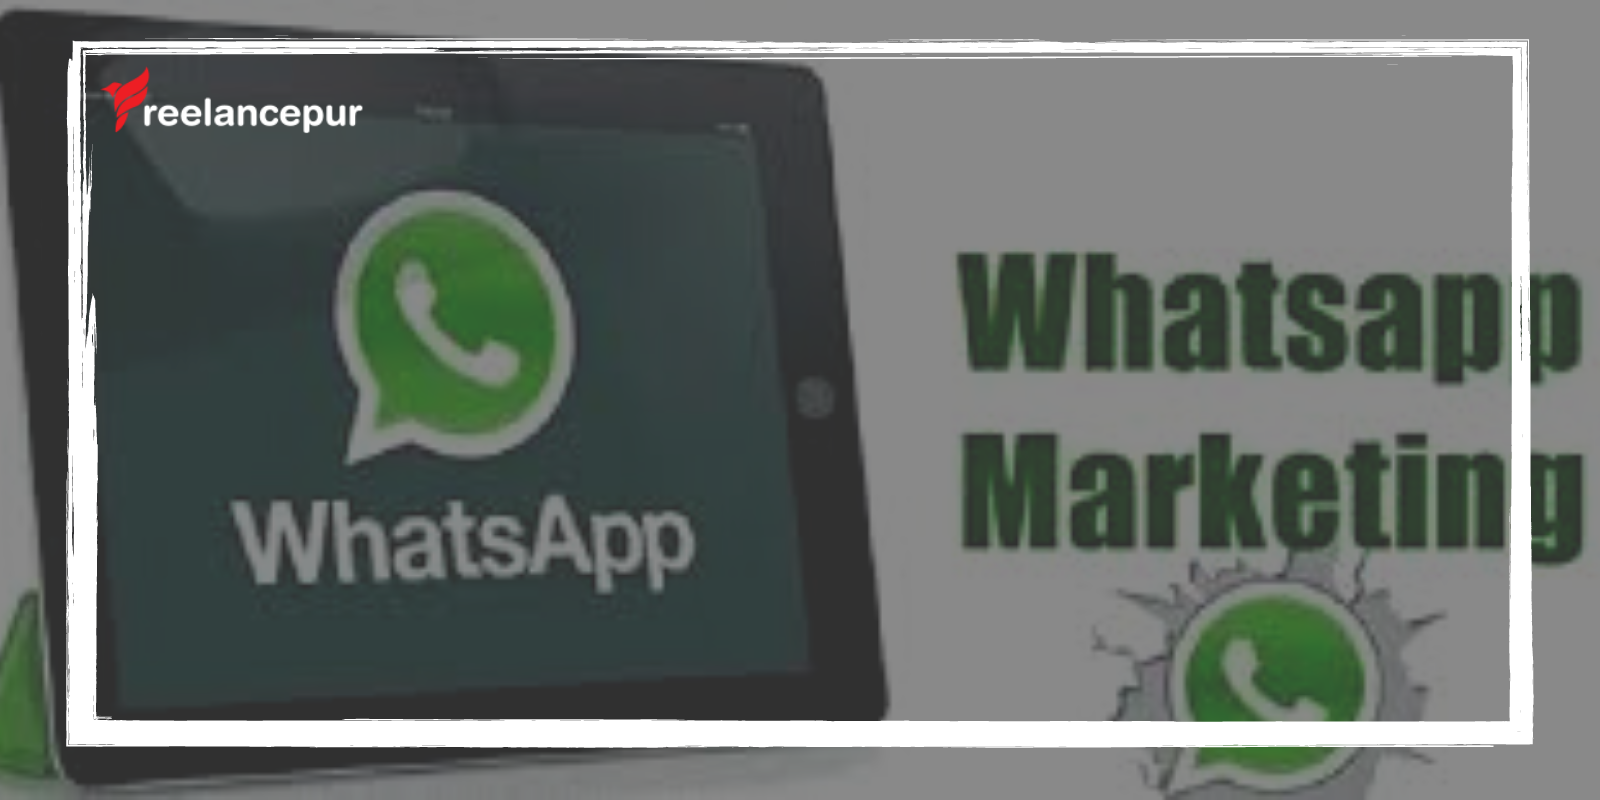 Whatsapp has been launched just a few years back and already has around 700 million users.